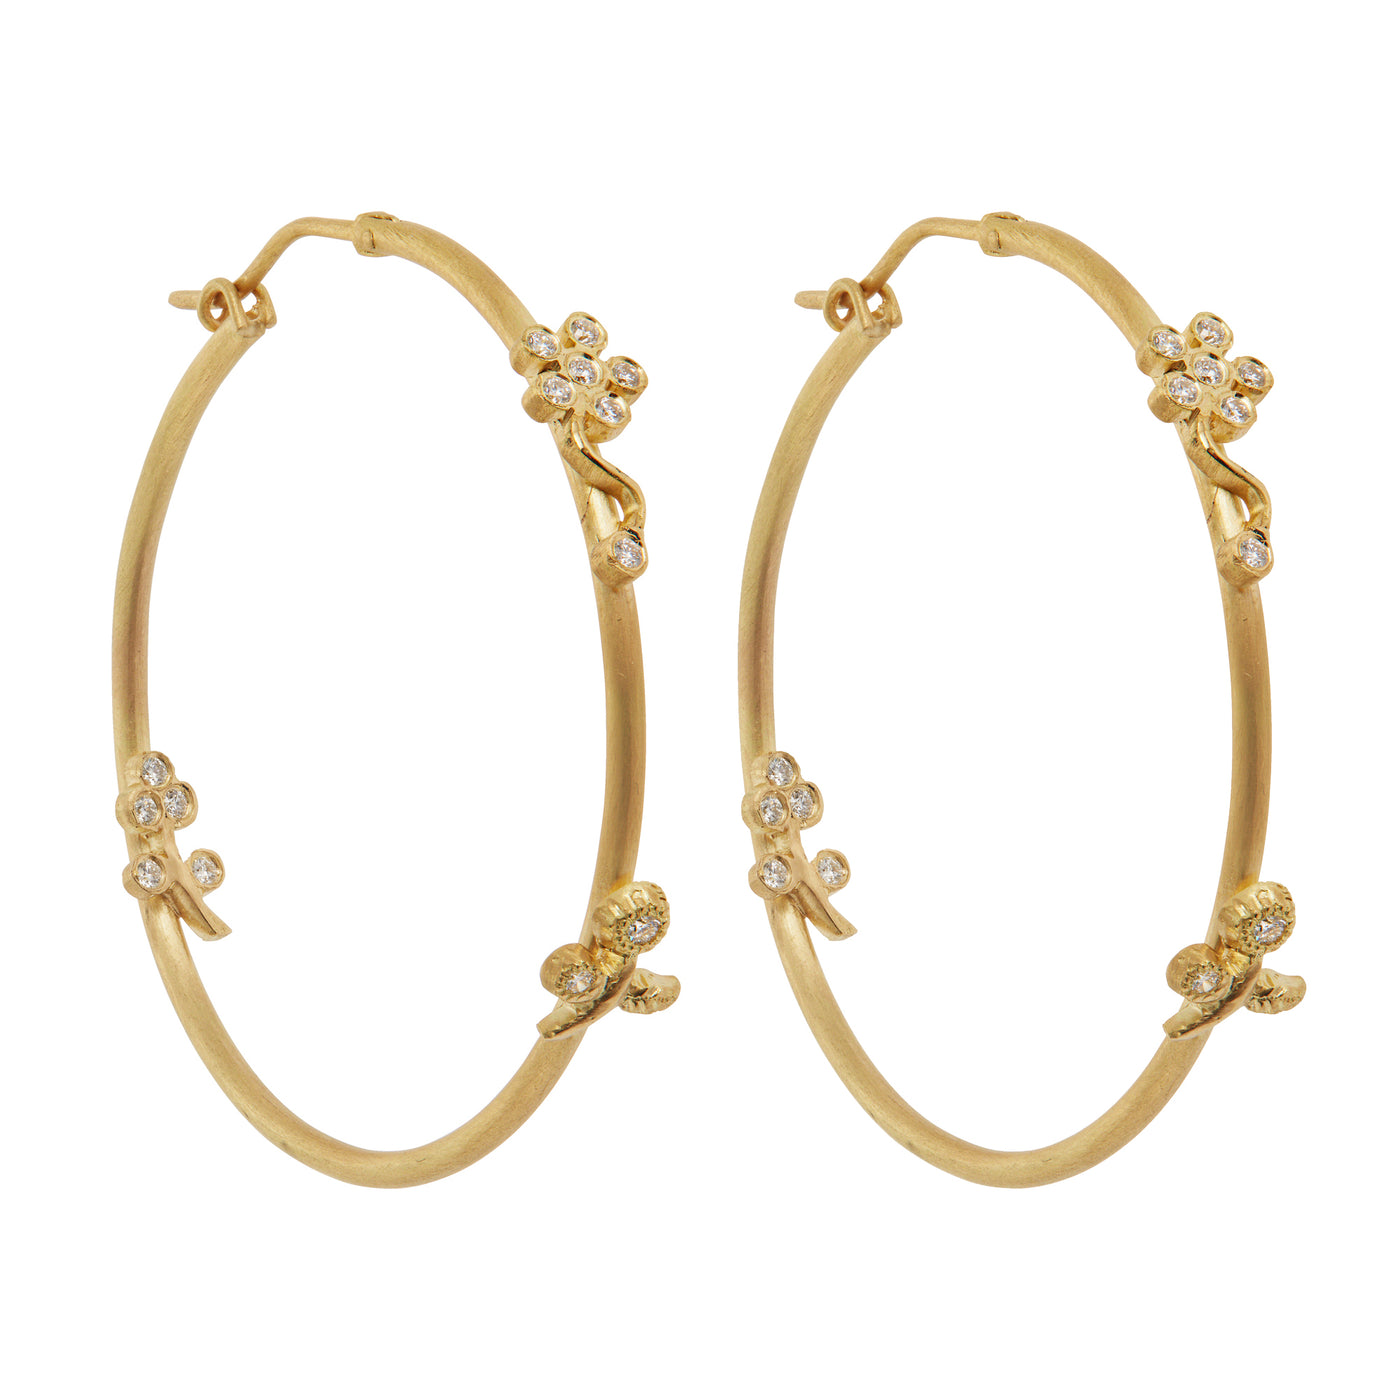 Large Daisy Hoops Y-D